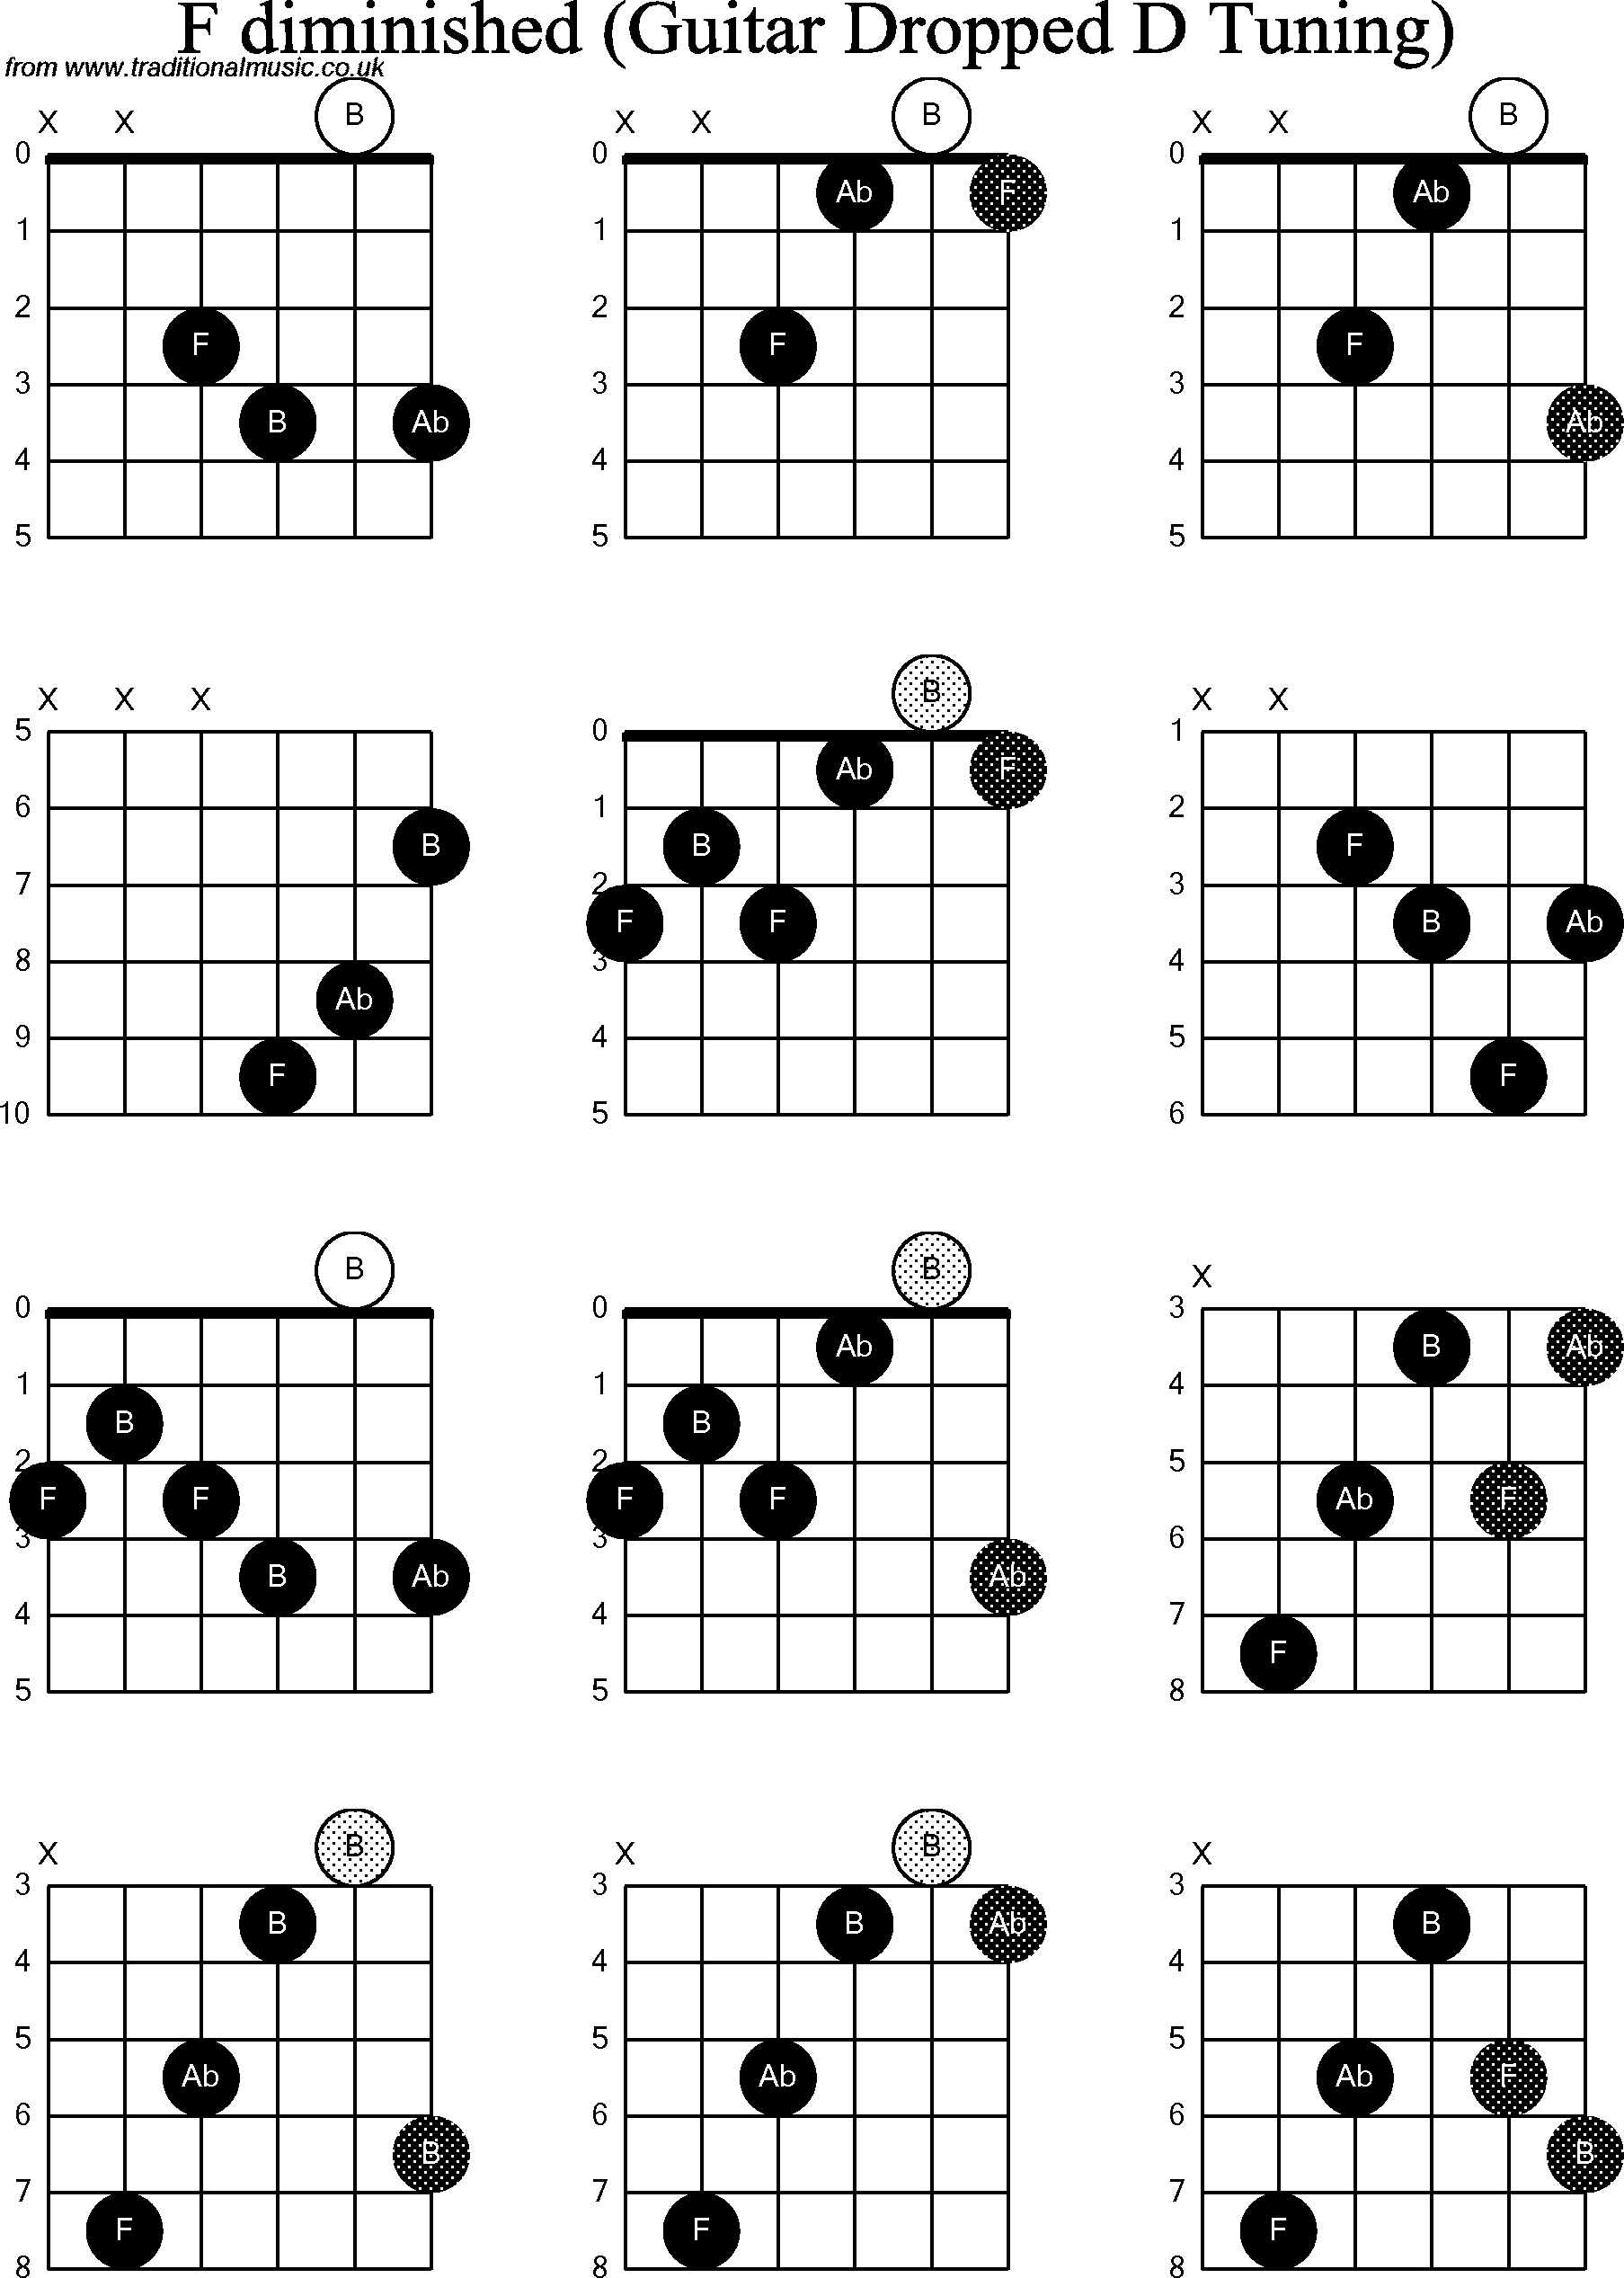 Chord Diagrams For Dropped D Guitar Dadgbe F Diminished